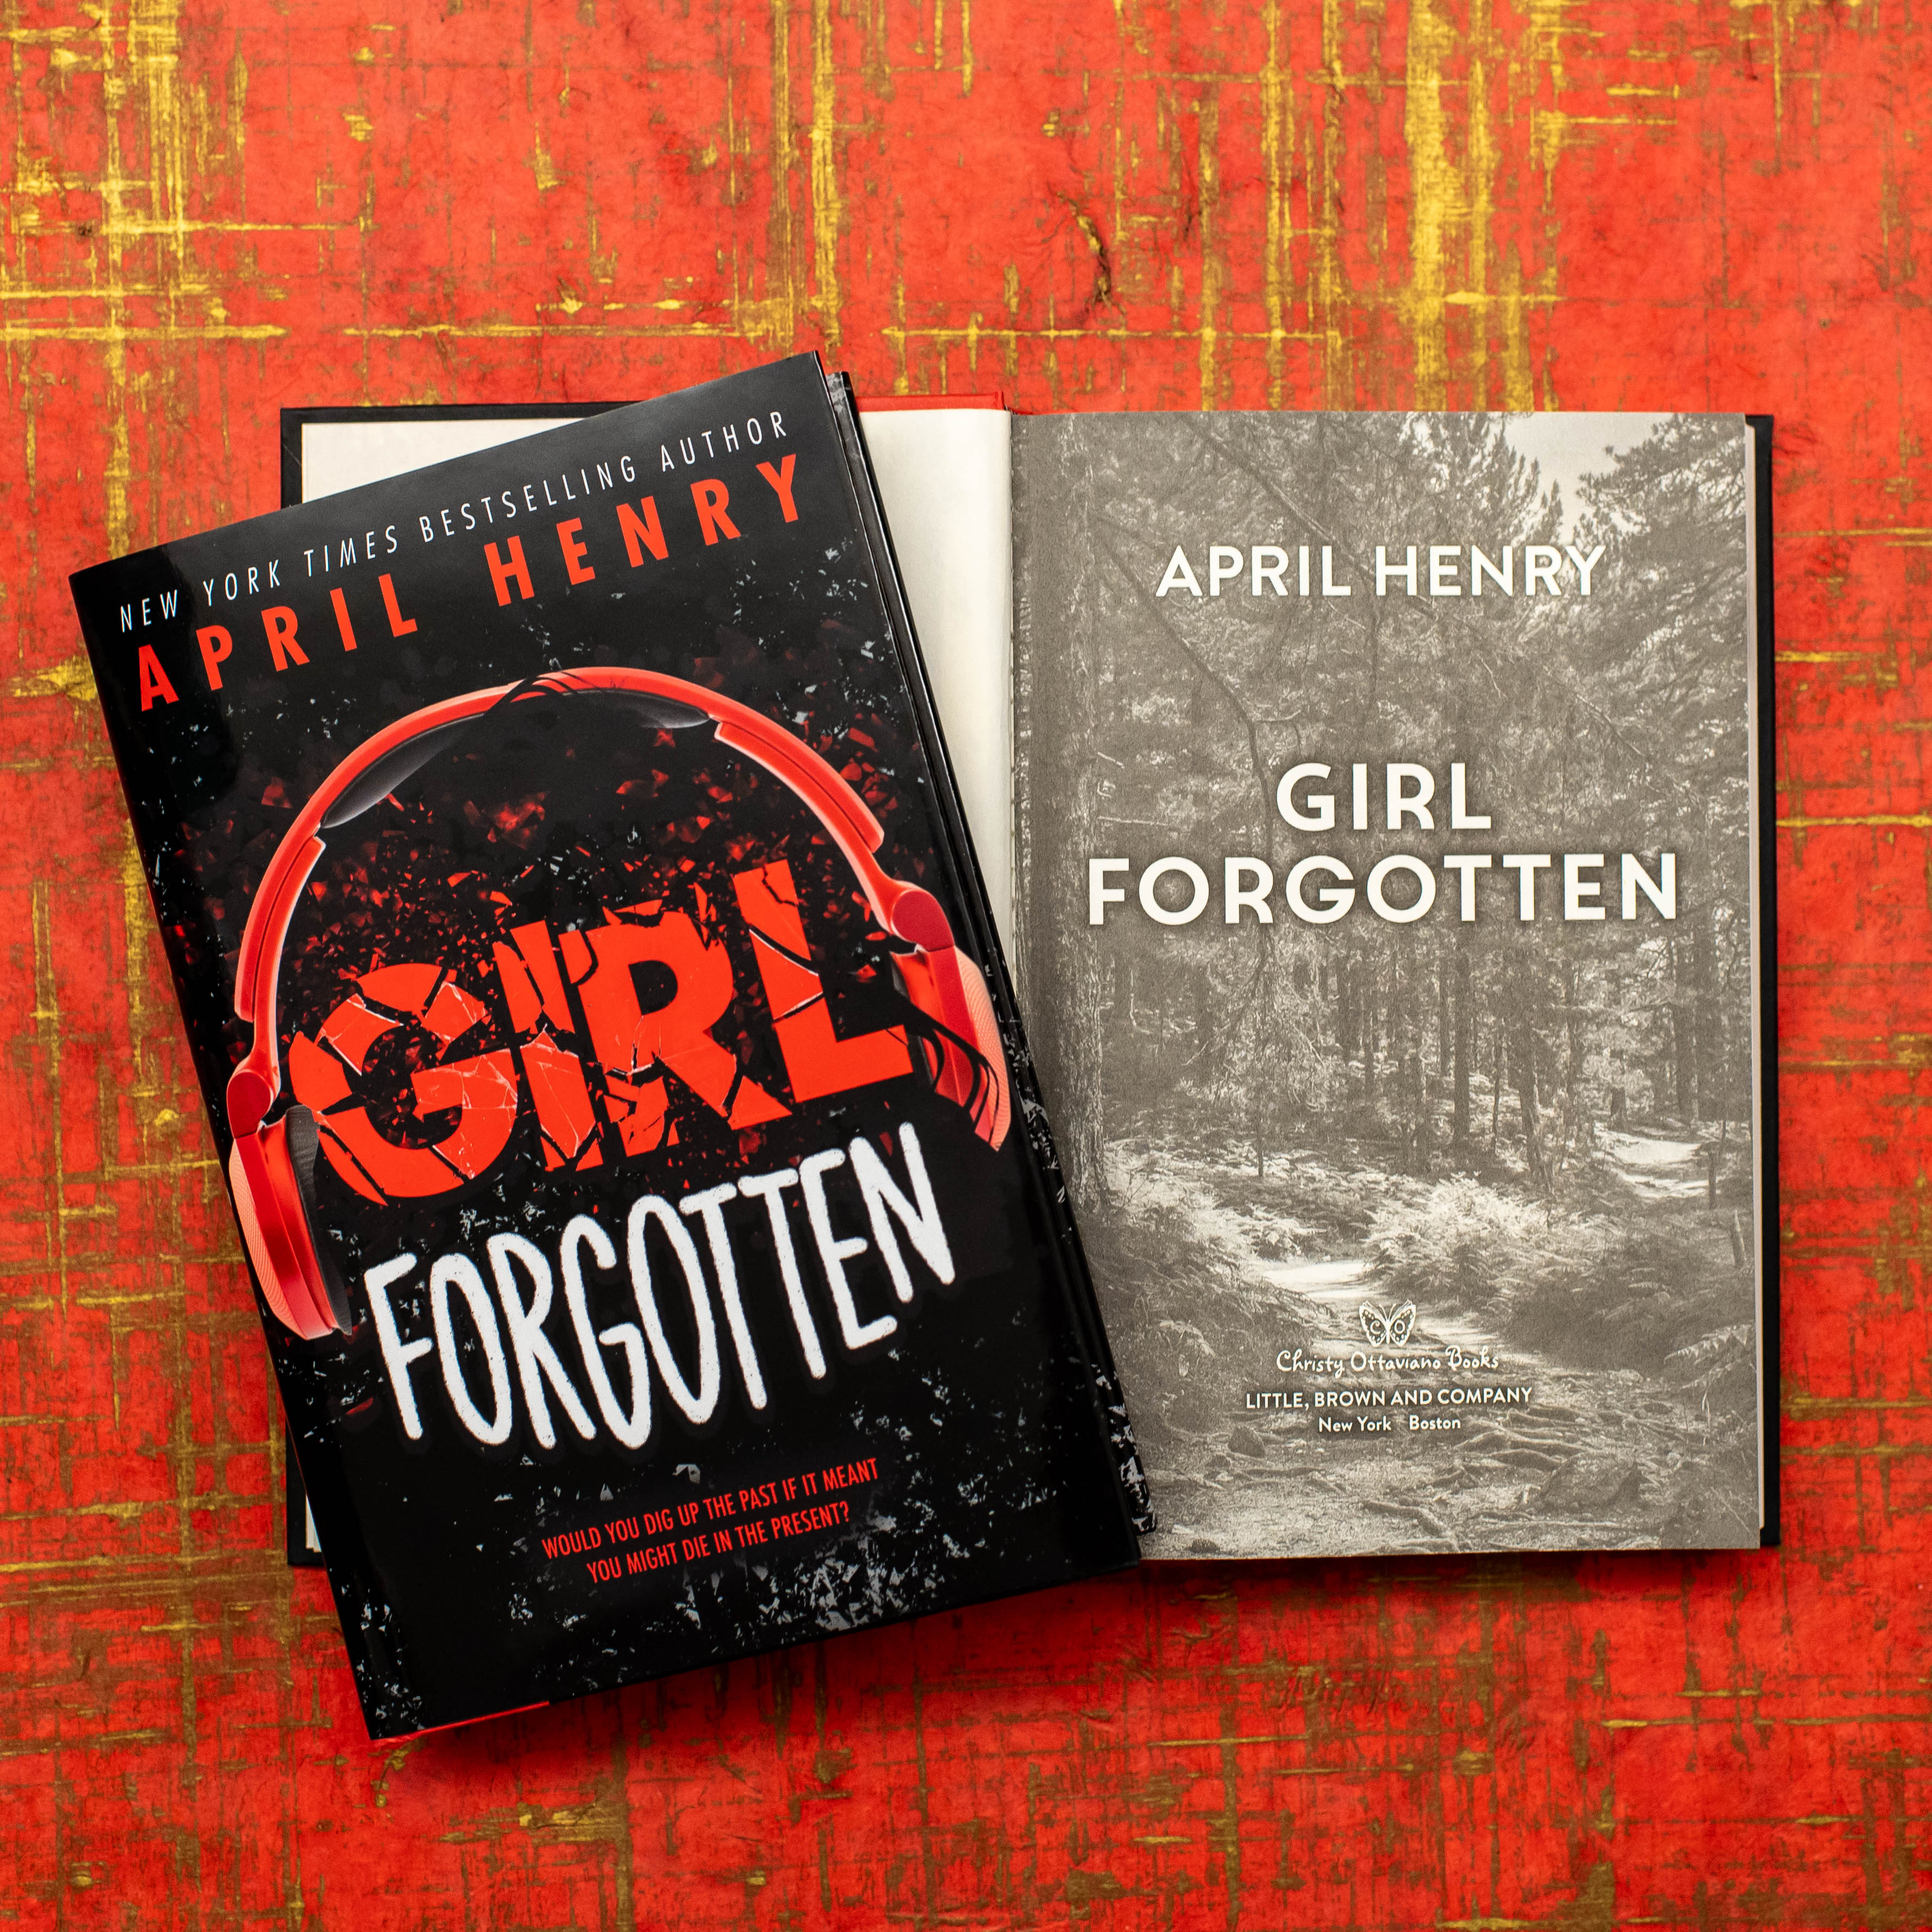 Image of the book "Girl Forgotten" by April Henry